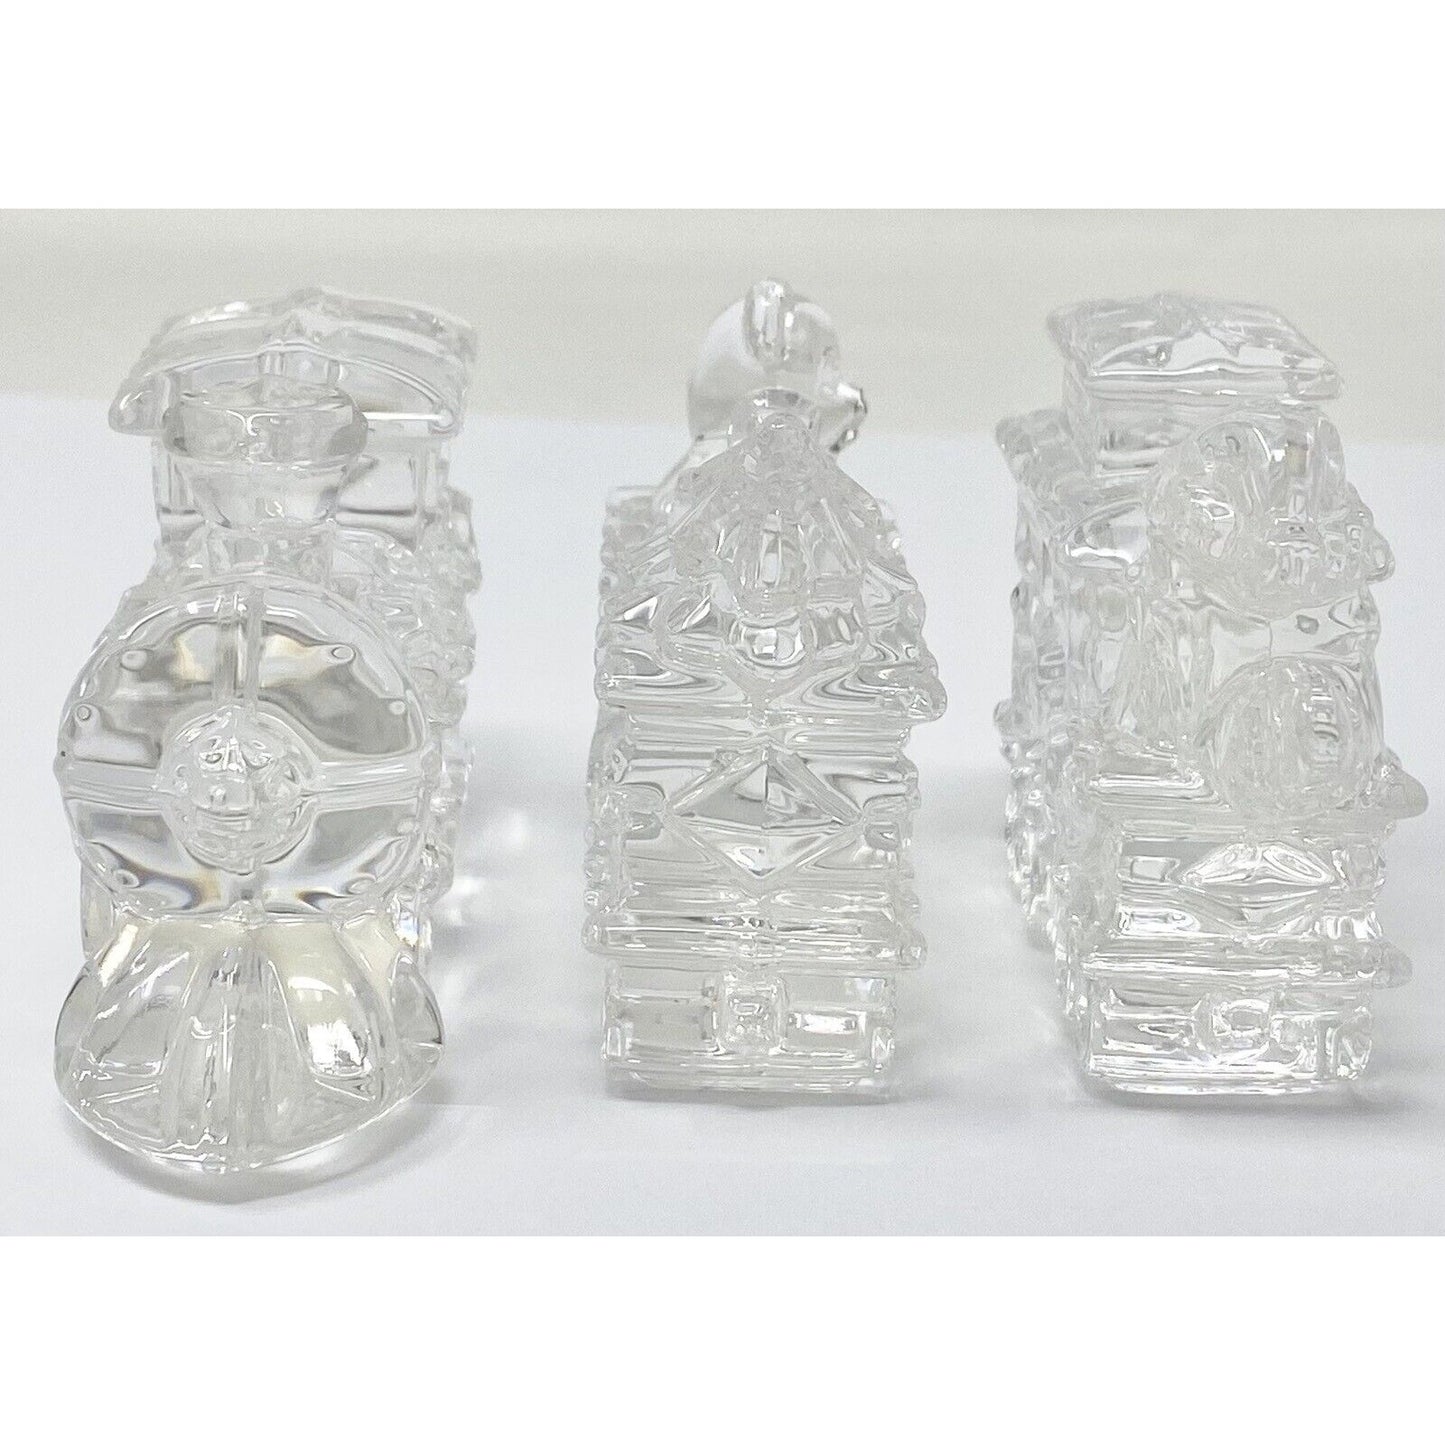 Retired 1997 Waterford Crystal Marquis Christmas Train Miniature 3pc Figurines